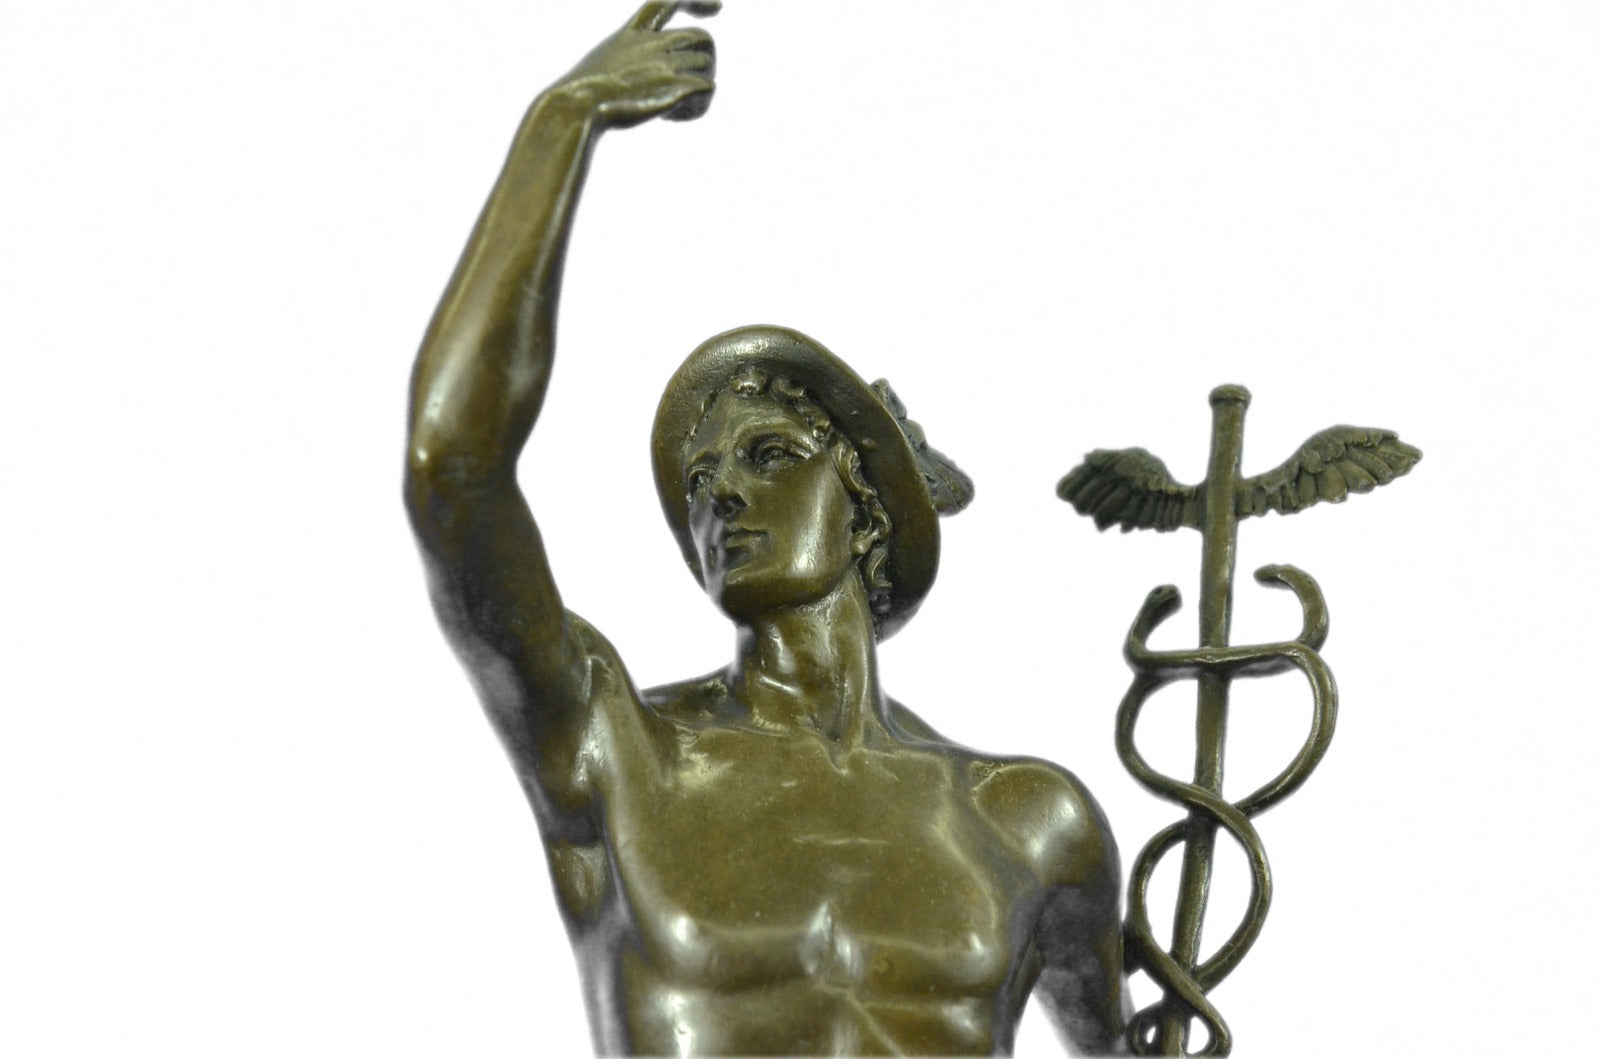 Vintage "Flying Mercury" 23"-High Bronze Statue with Black Circular Marble Base